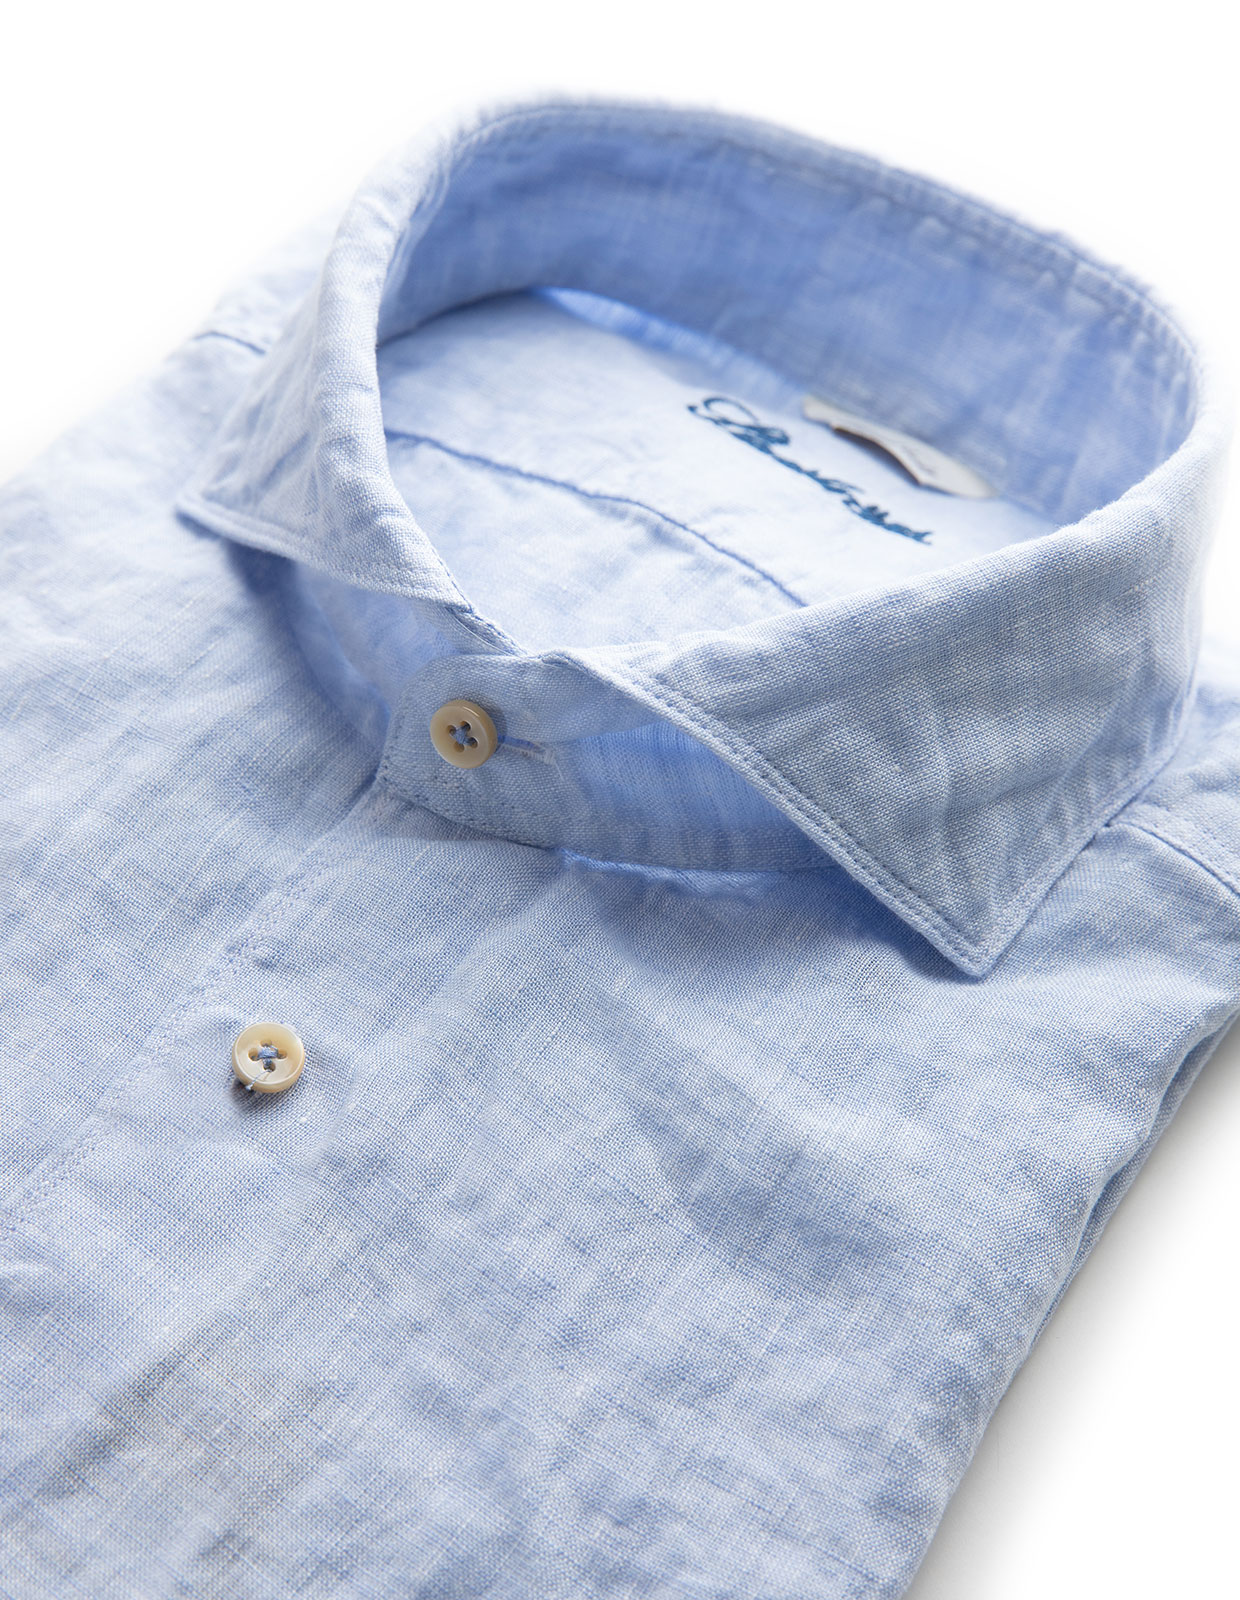 Fitted Body Short Sleeves Linen Shirt Pale Blue